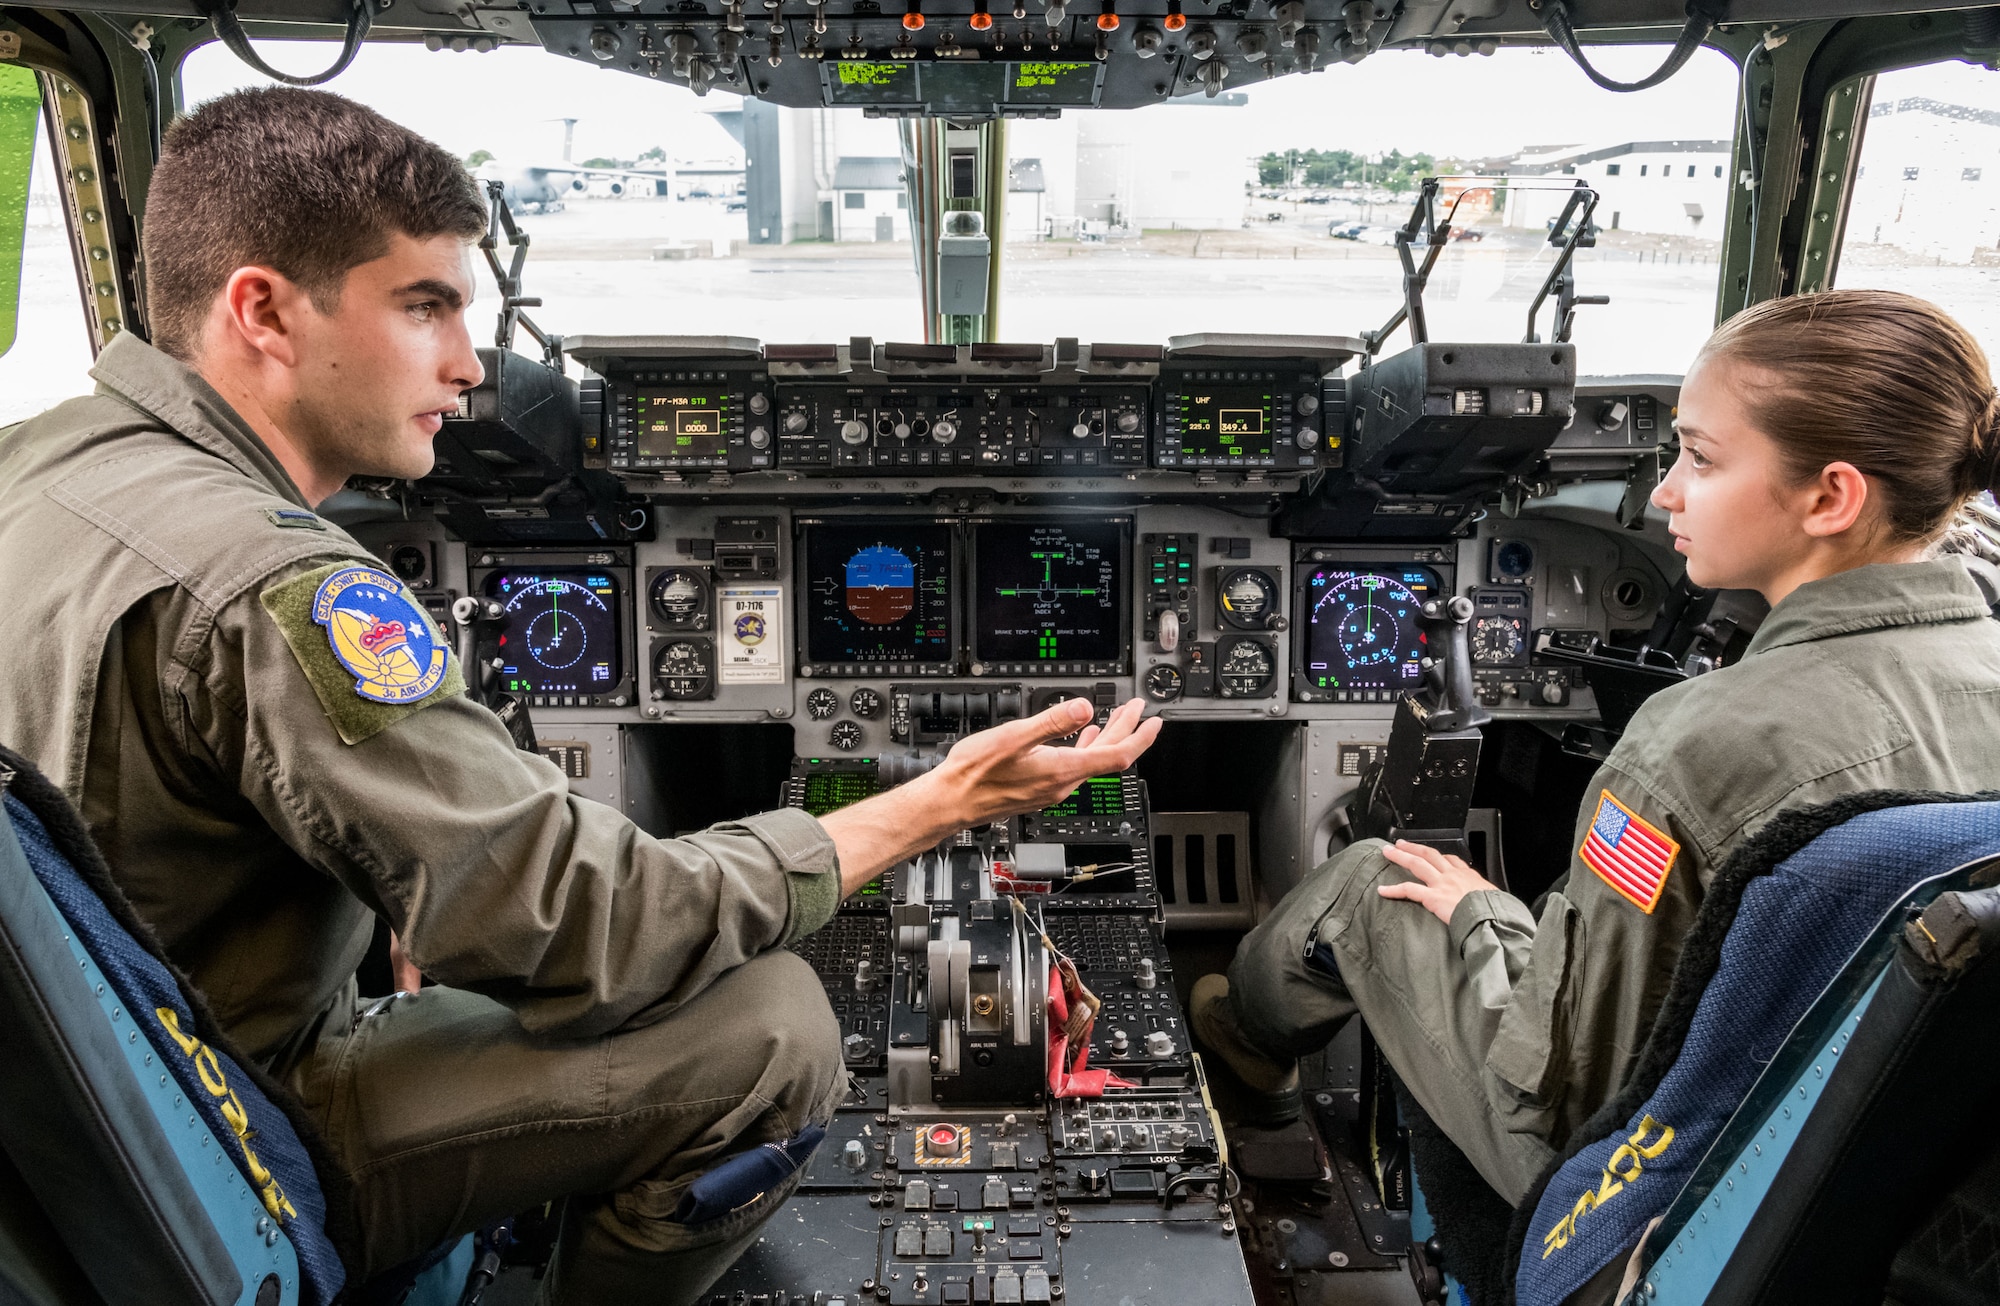 First Lt. Stephen Muer, 3rd Airlift Squadron C-17A Globemaster III pilot, talks with Air Force Junior Reserve Officers’ Training Corps cadet Amanda Pieraccini on the flight deck of a C-17A Globemaster III July 23, 2019, at Dover Air Force Base, Del. Pieraccini was one of the 23 cadets who attended the eight-week AFJROTC Summer Flight Academy at Delaware State University in Dover. Pieraccini is a cadet with AFJROTC Detachment NY-932, Aviation High School, Long Island City, N.Y. (U.S. Air Force photo by Roland Balik)